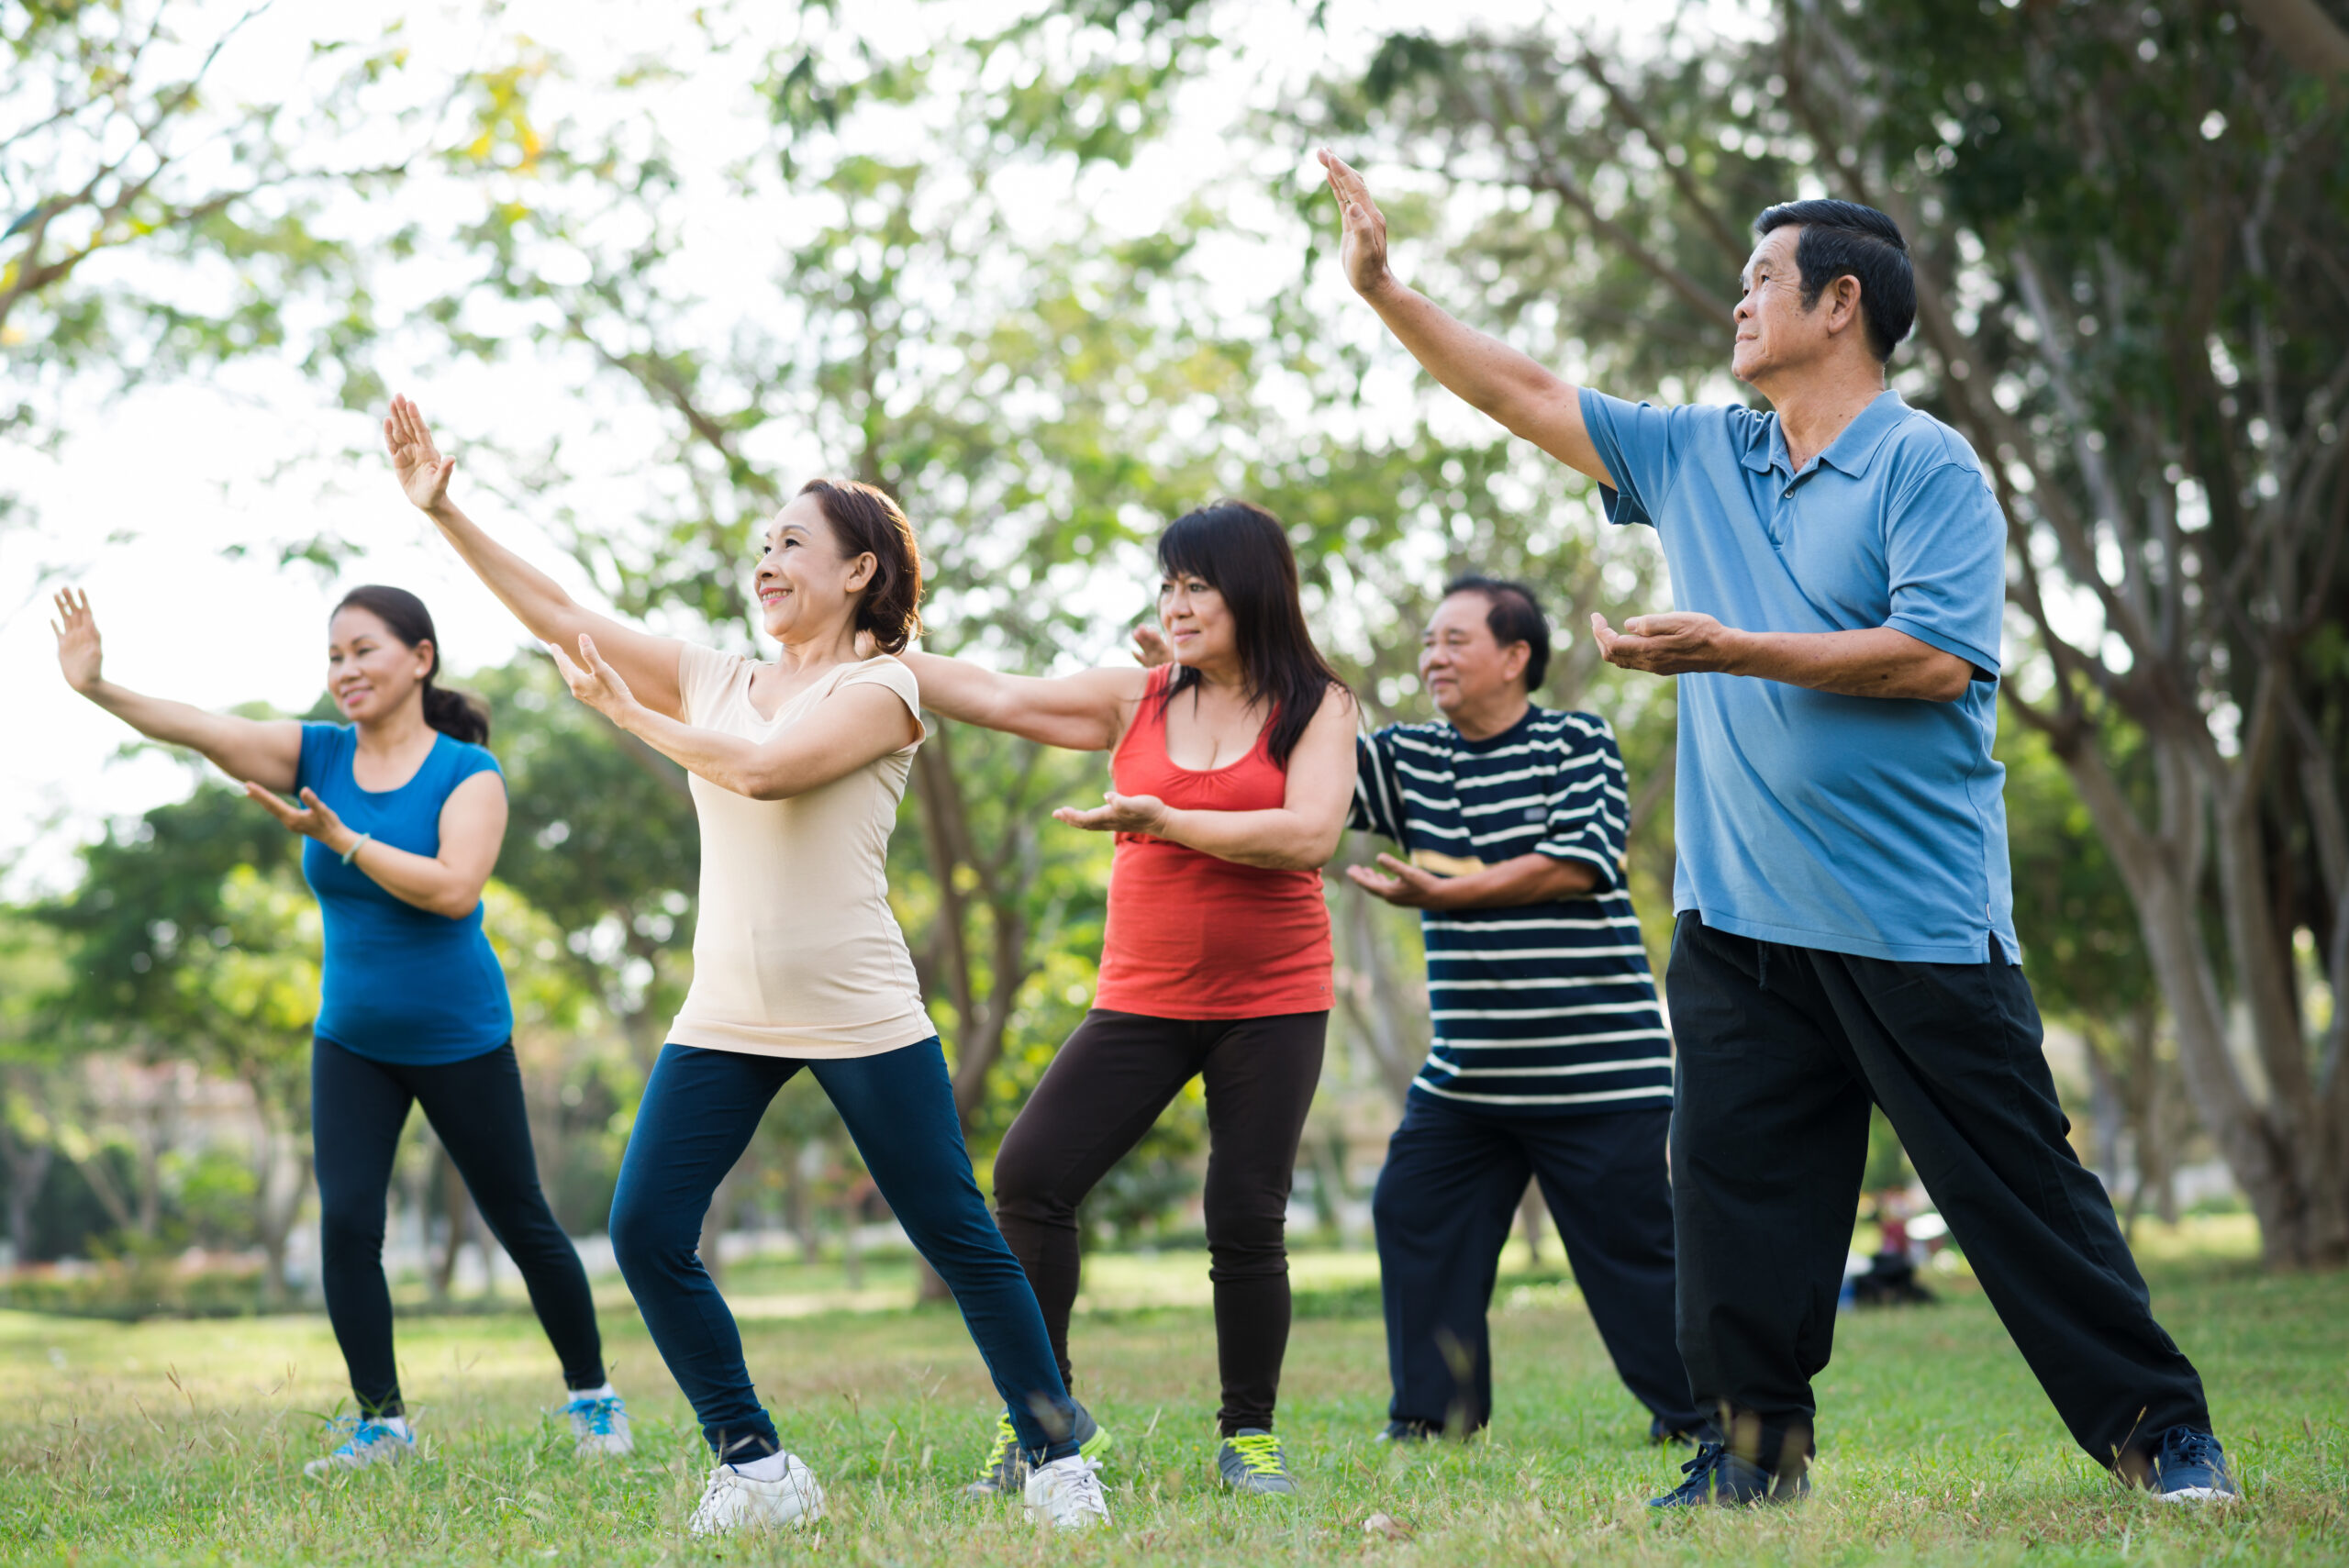 Why are yoga and tai chi beneficial for our bodies and minds?